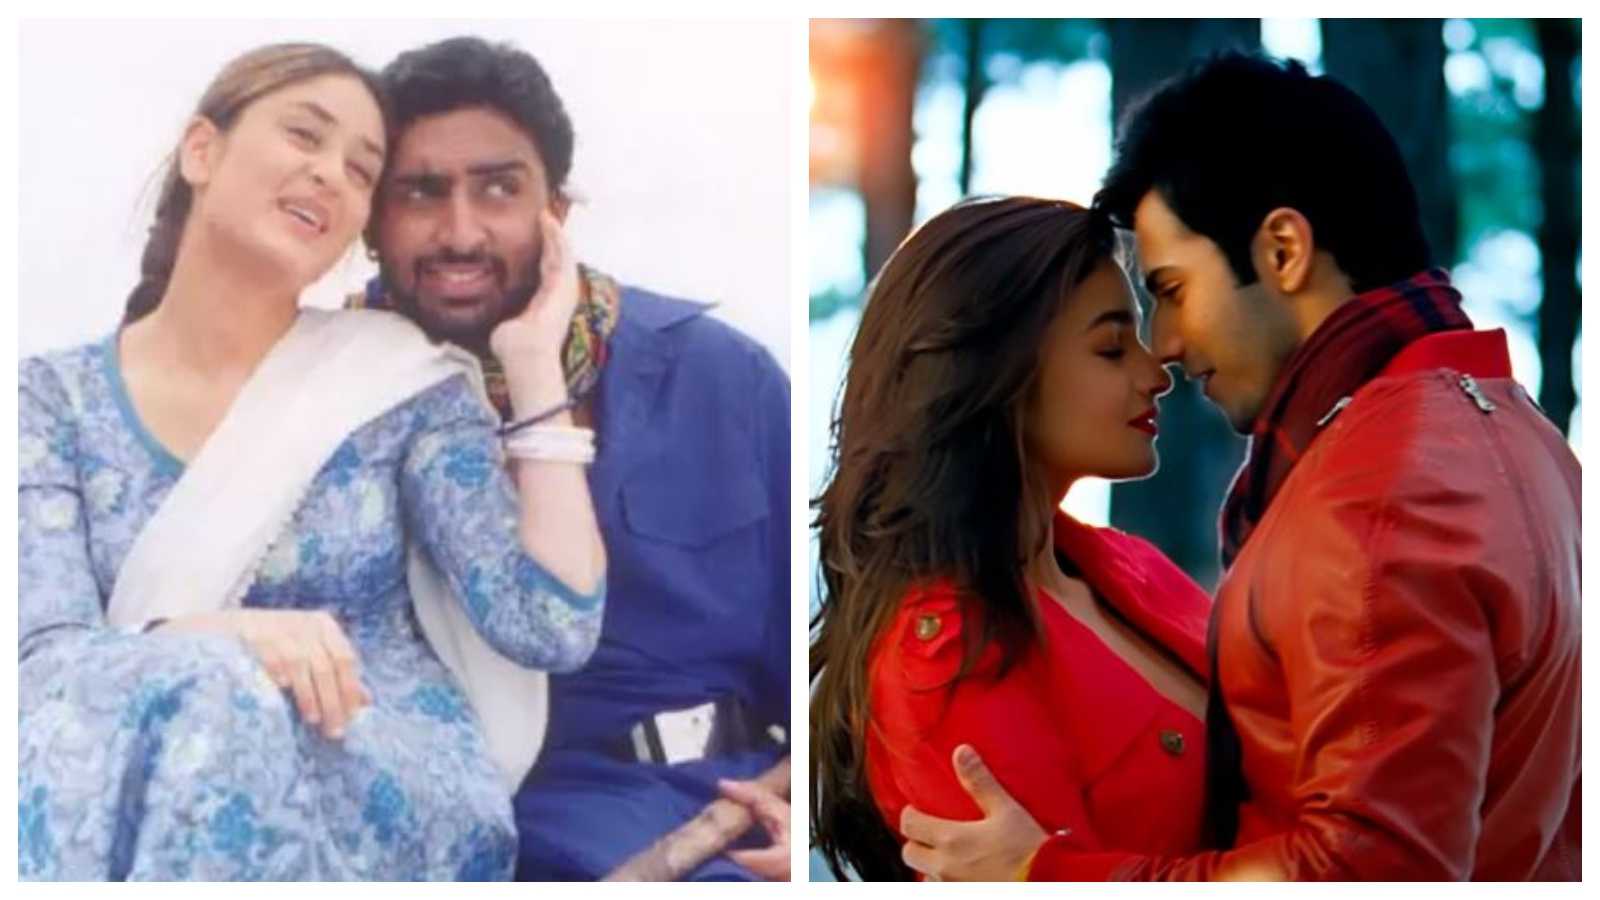 From Kareena-Abhishek to Alia-Varun, star kids who entered Bollywood together but have contrasting acting journeys